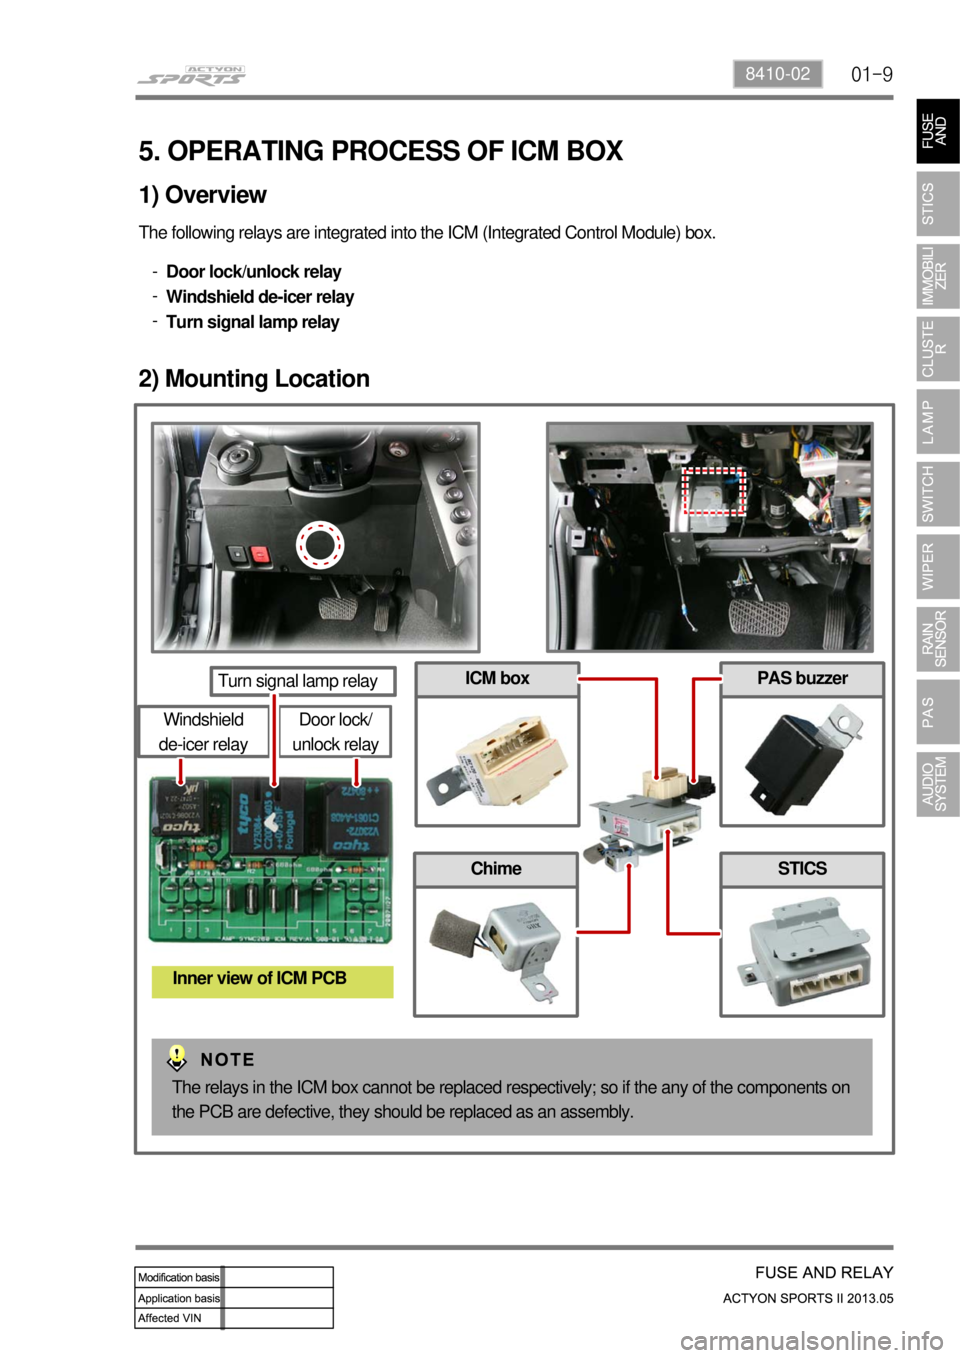 SSANGYONG NEW ACTYON SPORTS 2013  Service Manual 01-98410-02
5. OPERATING PROCESS OF ICM BOX
The following relays are integrated into the ICM (Integrated Control Module) box.
Door lock/unlock relay
Windshield de-icer relay
Turn signal lamp relay -
-